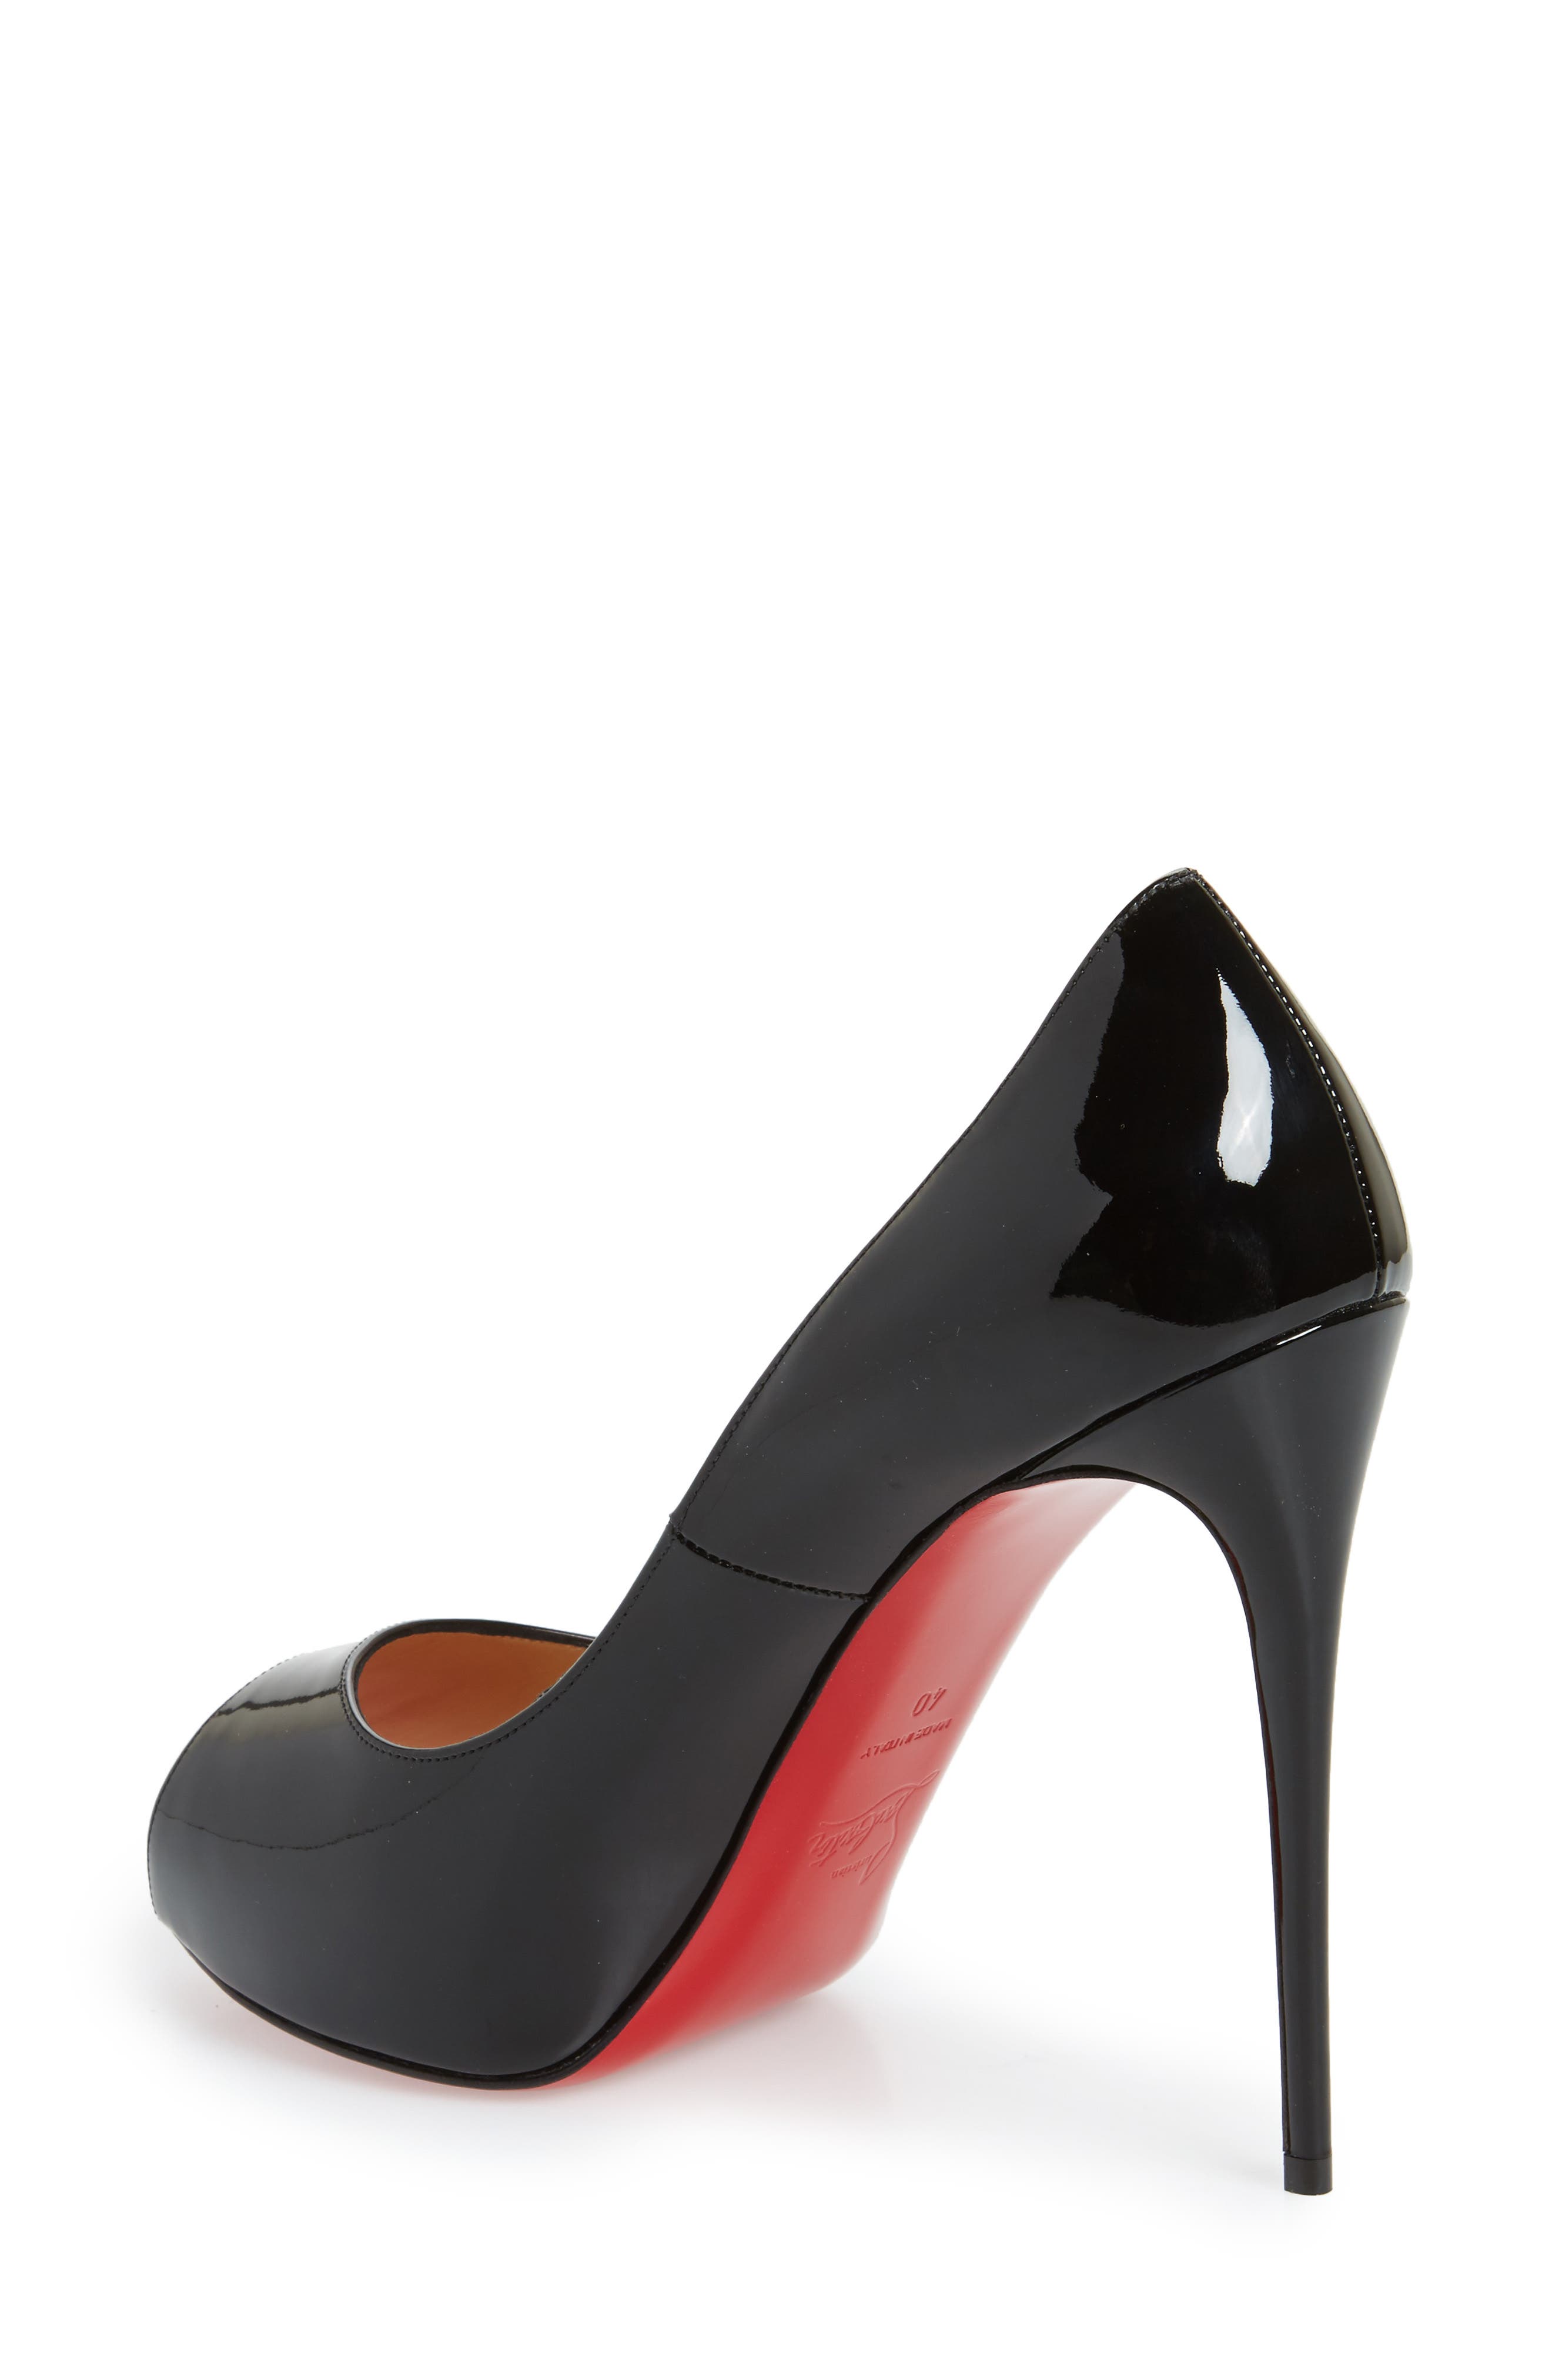 CHRISTIAN LOUBOUTIN New Very Prive Patent Red Sole Pump, Black/Red | ModeSens